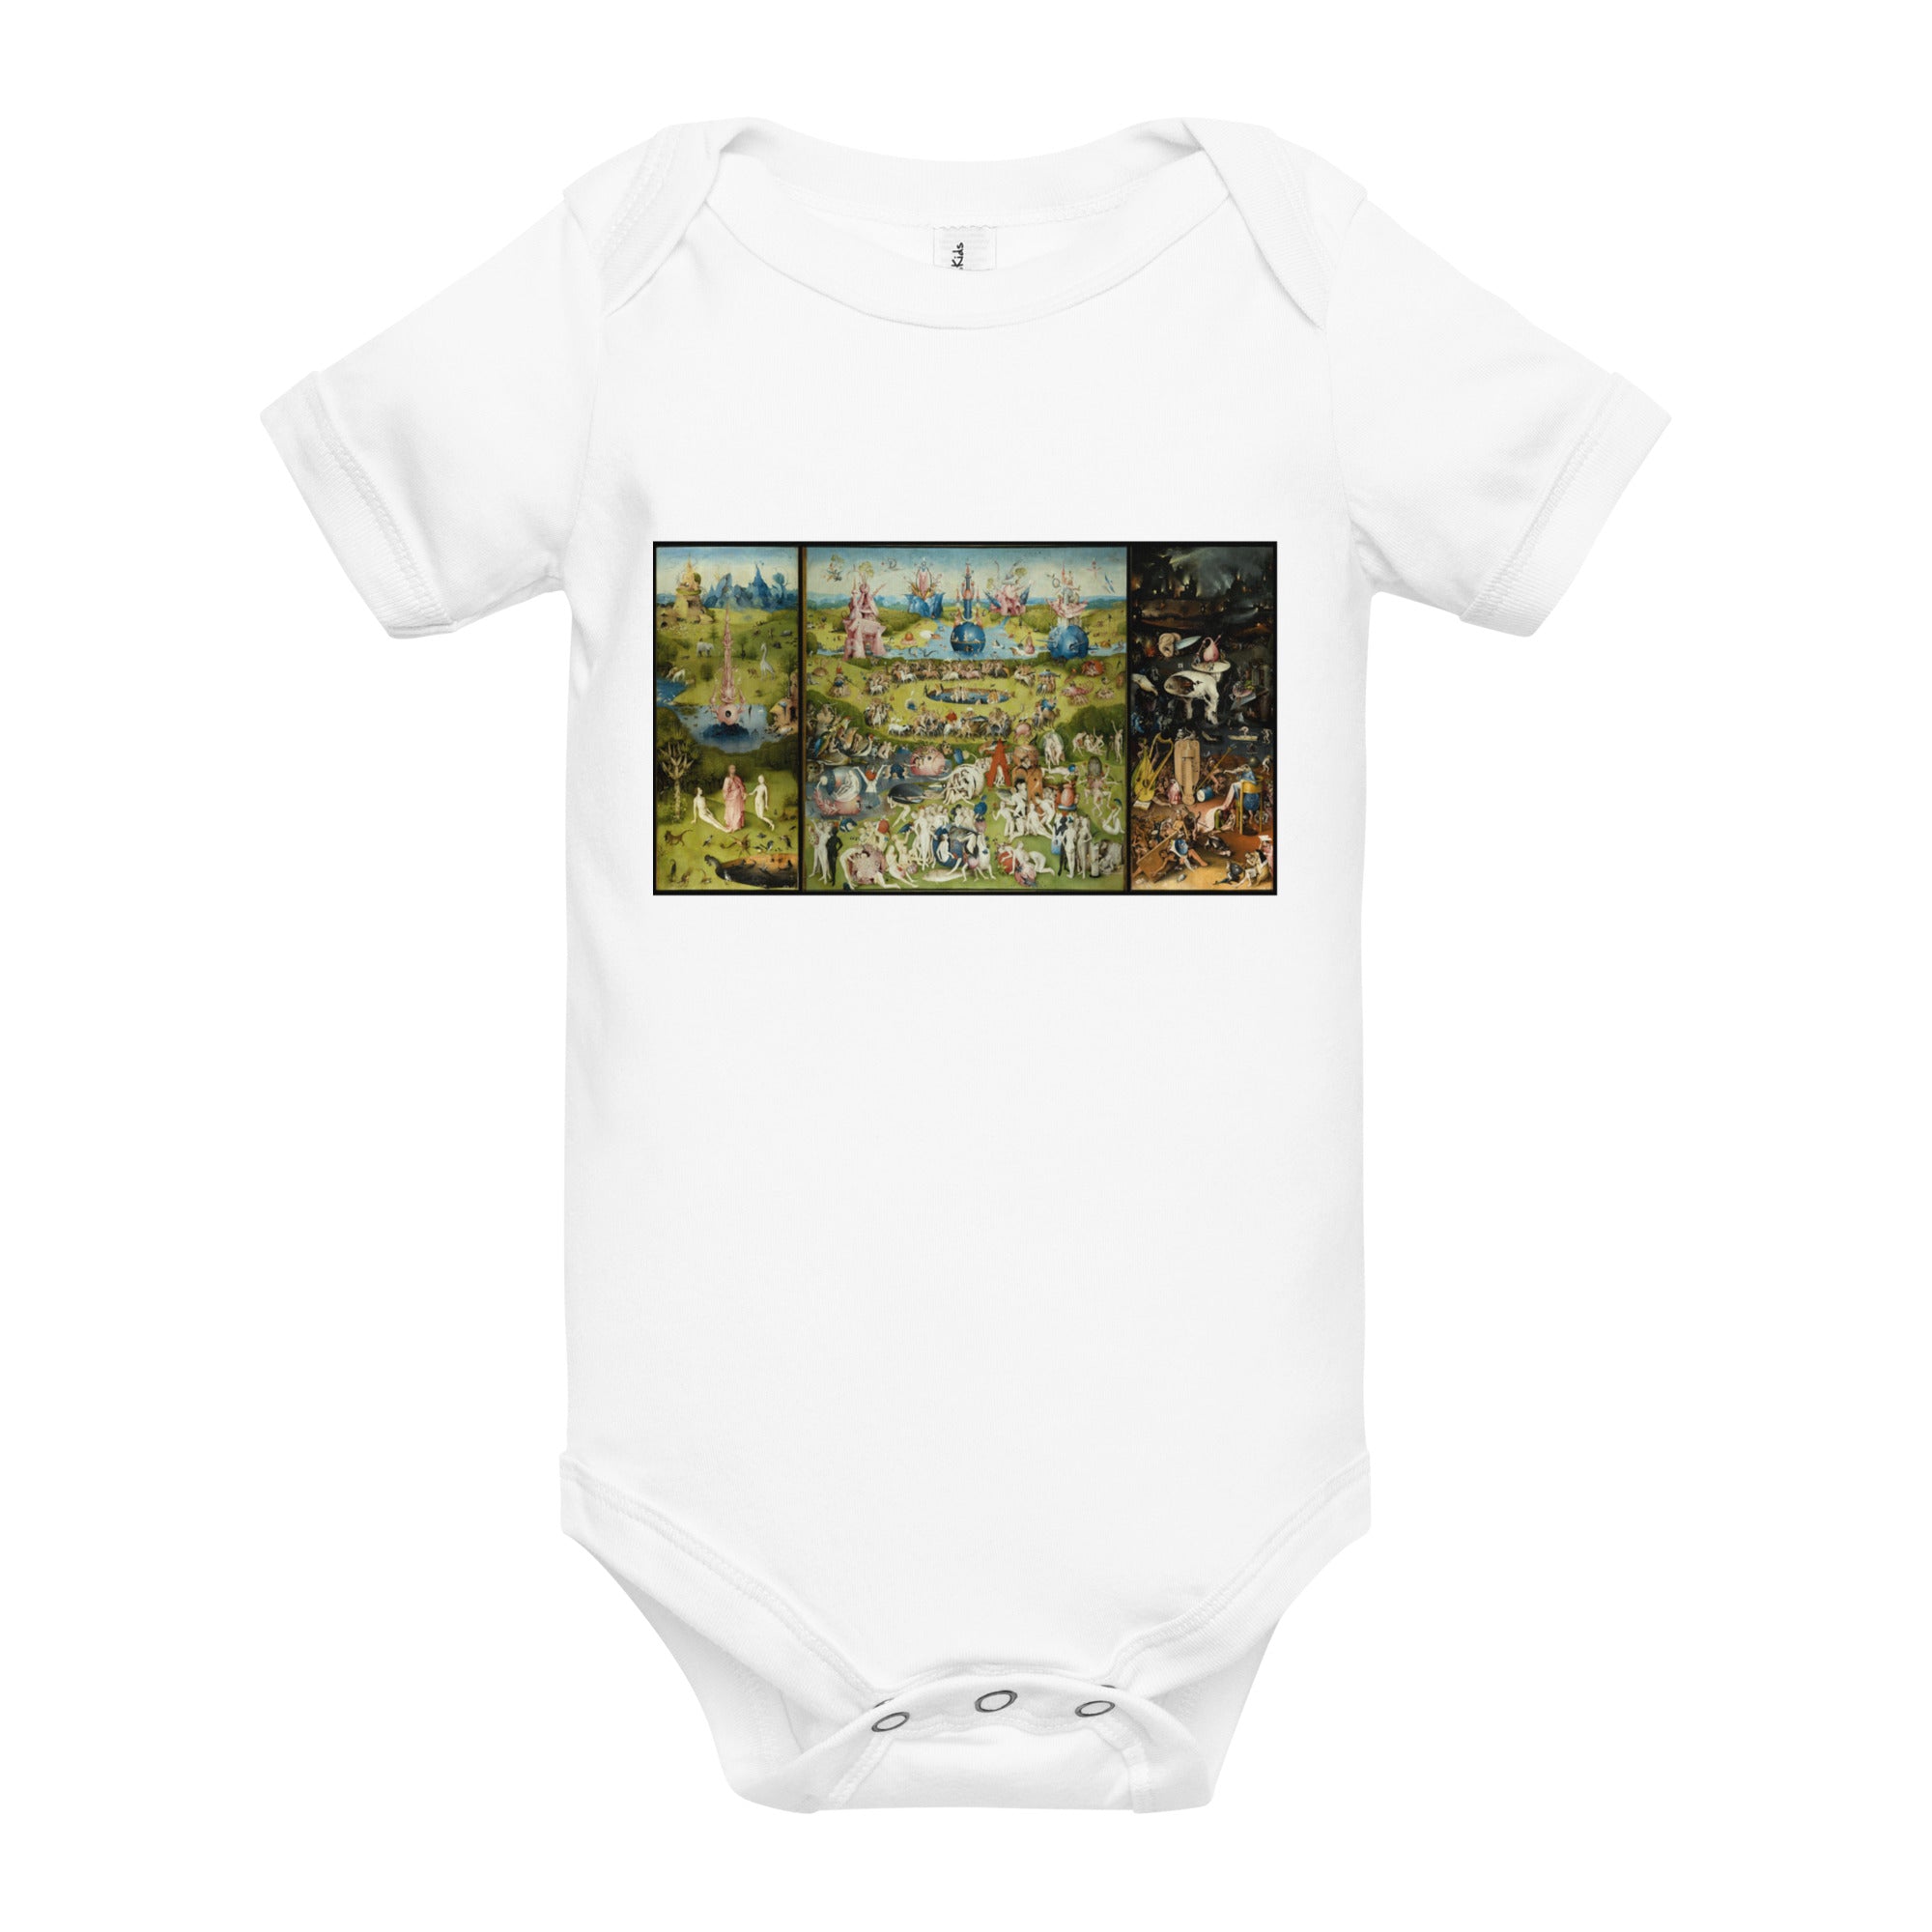 Hieronymus Bosch 'The Garden of Earthly Delights' Famous Painting Short Sleeve One Piece | Premium Baby Art One Sleeve